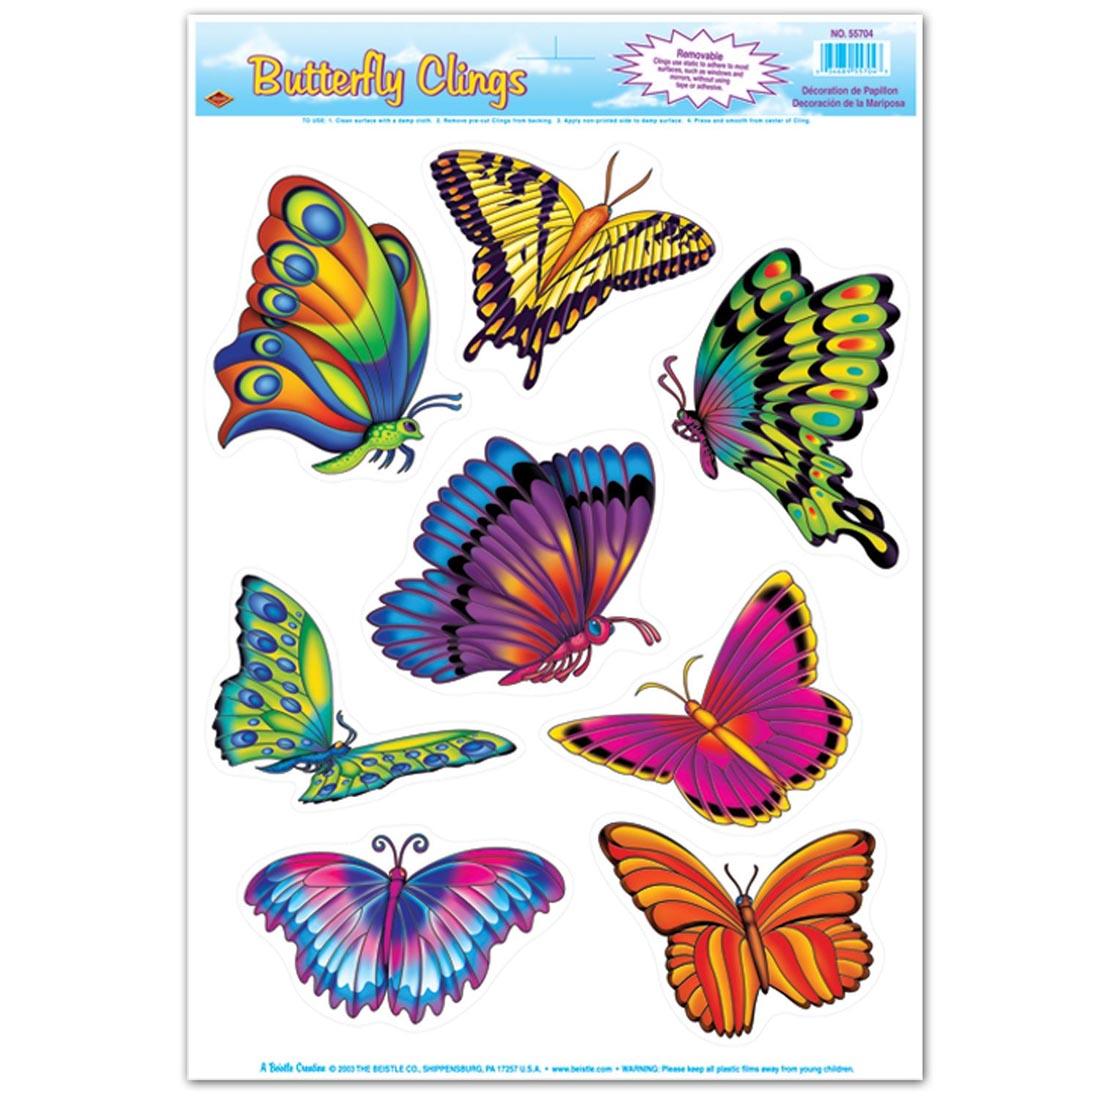 Butterfly Clings By Beistle Company, showing 8 butterfly designs in assorted colors and sizes